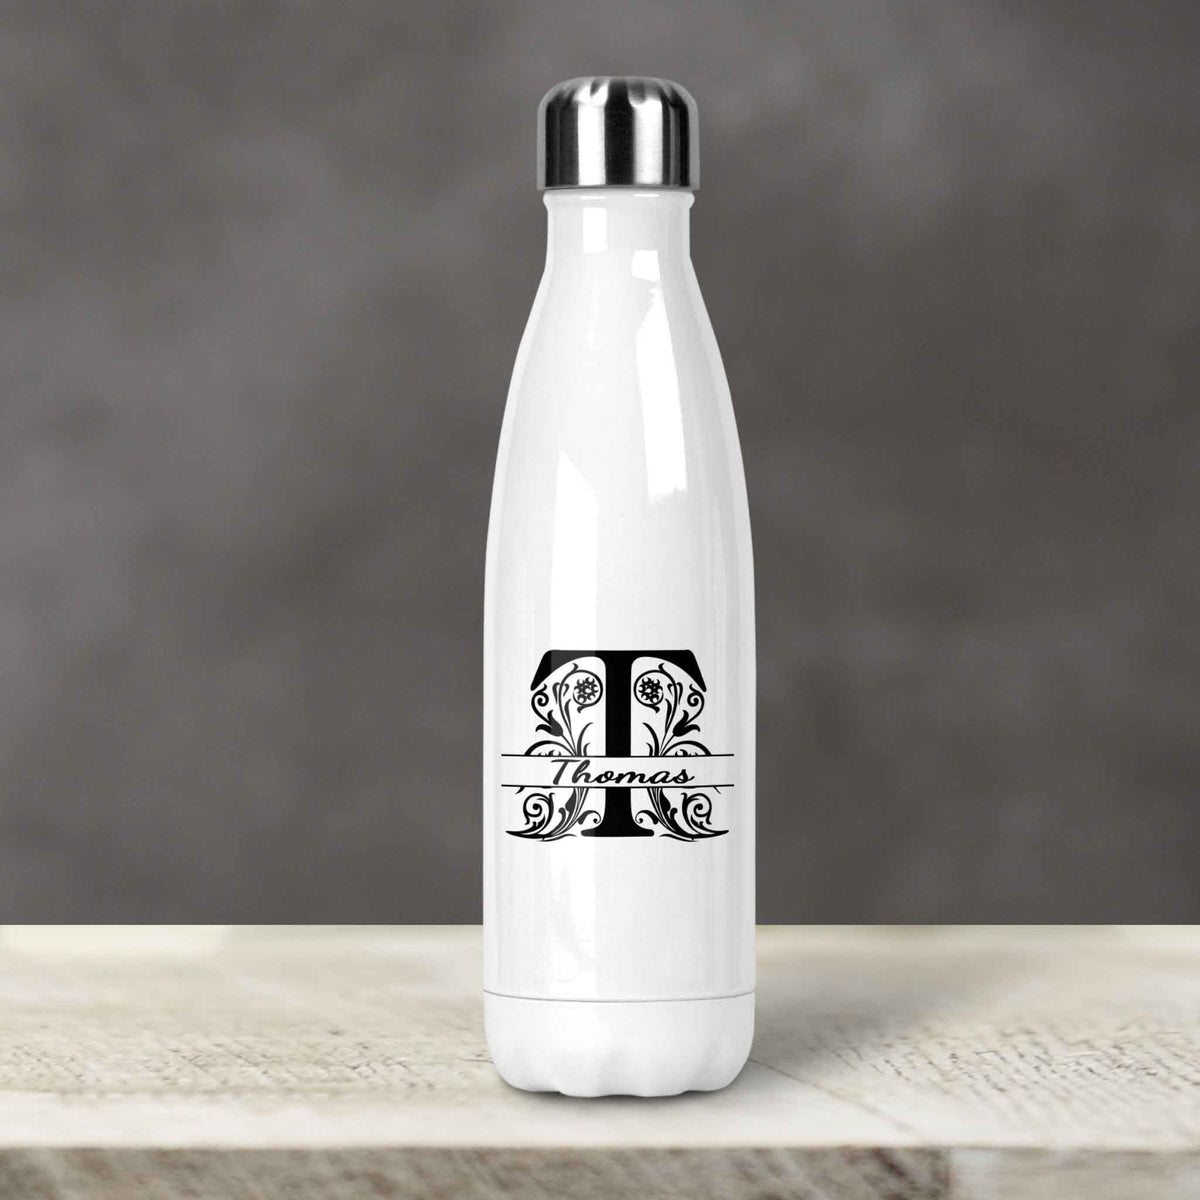 https://www.thisandthatsolutions.shop/wp-content/uploads/1700/27/our-online-store-offers-a-wide-selection-of-personalized-water-bottles-custom-stainless-steel-water-bottles-17-oz-soda-regal-monogram-this-that-solutions-outlet-sale_0.jpg